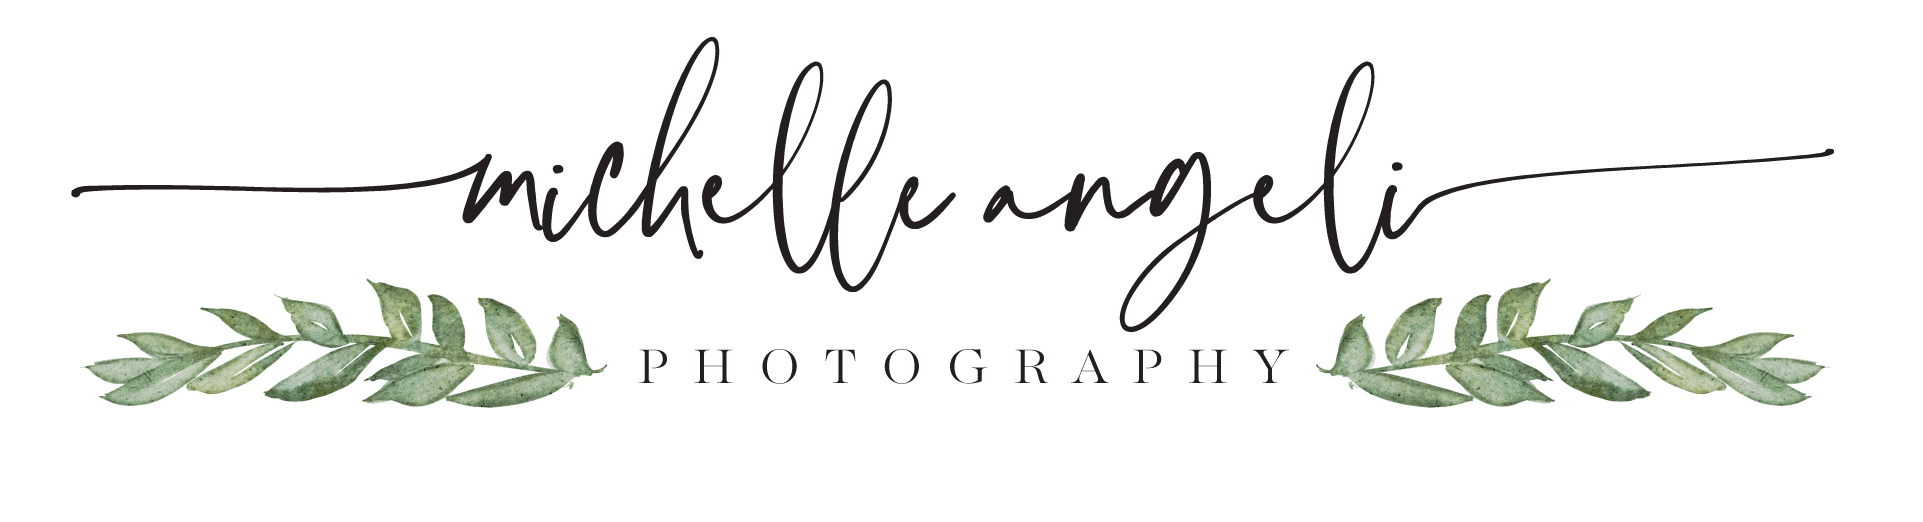 Michelle Angeli Photography Wedding Photographers The Knot